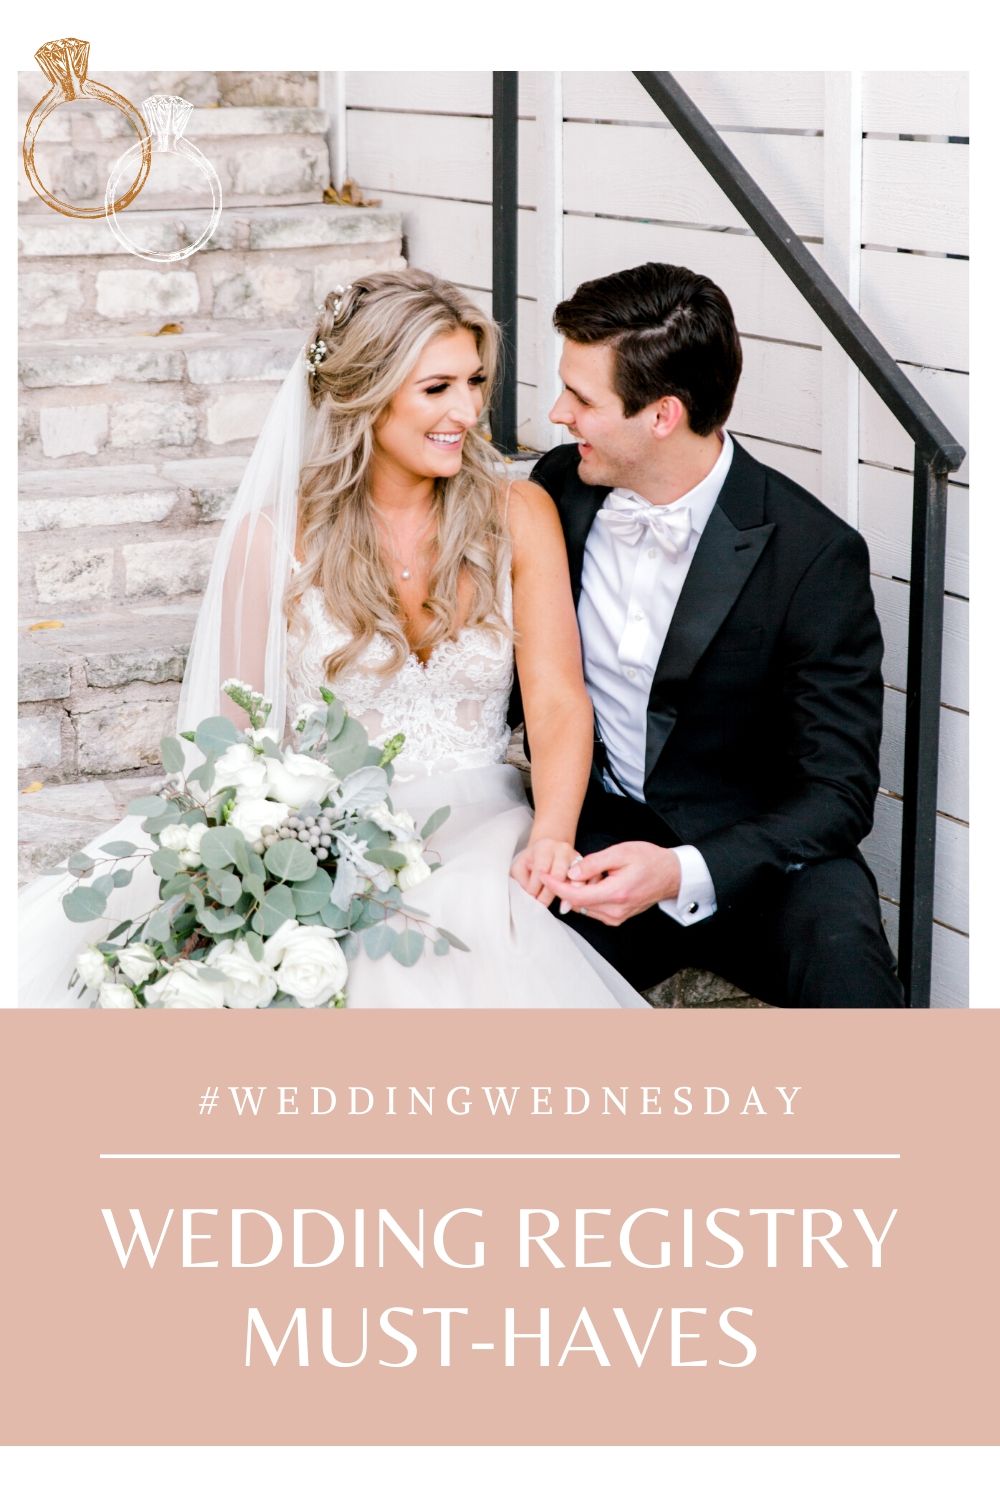 Wedding Registry Must-Haves - Audrey Madison Stowe